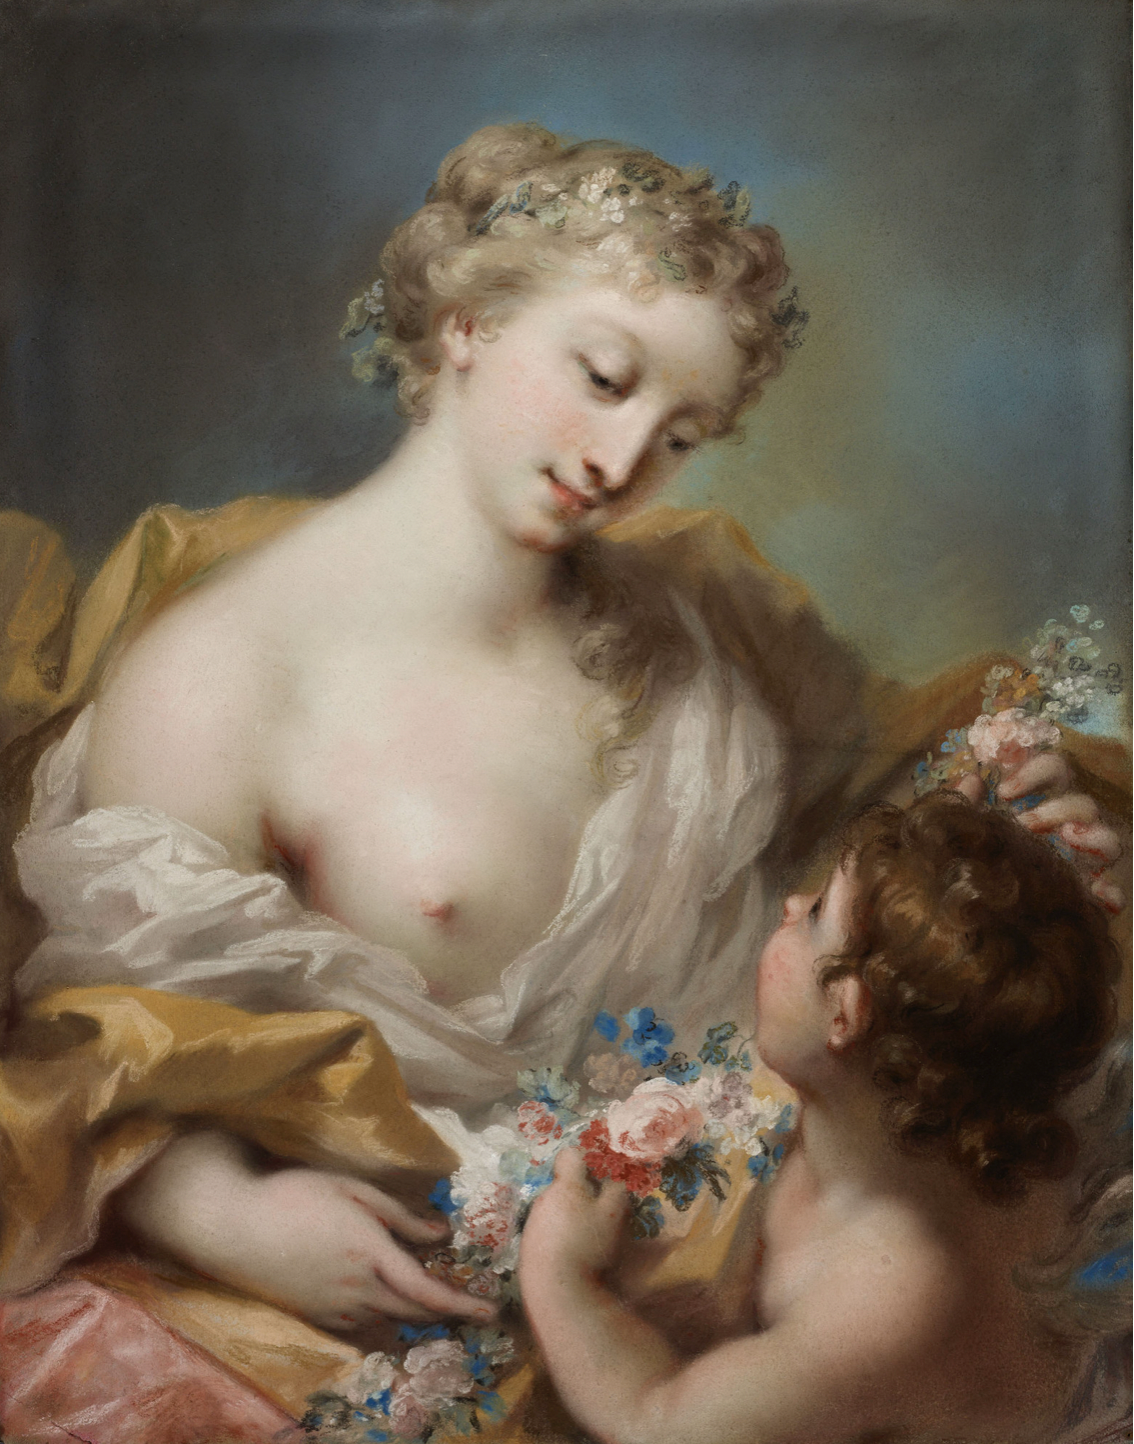 Rosalba Giovanna Carriera, "A Personification of Spring," c.1730, pastel on blue paper, 64.1 x 50.2 cm, Royal Collection Trust, UK